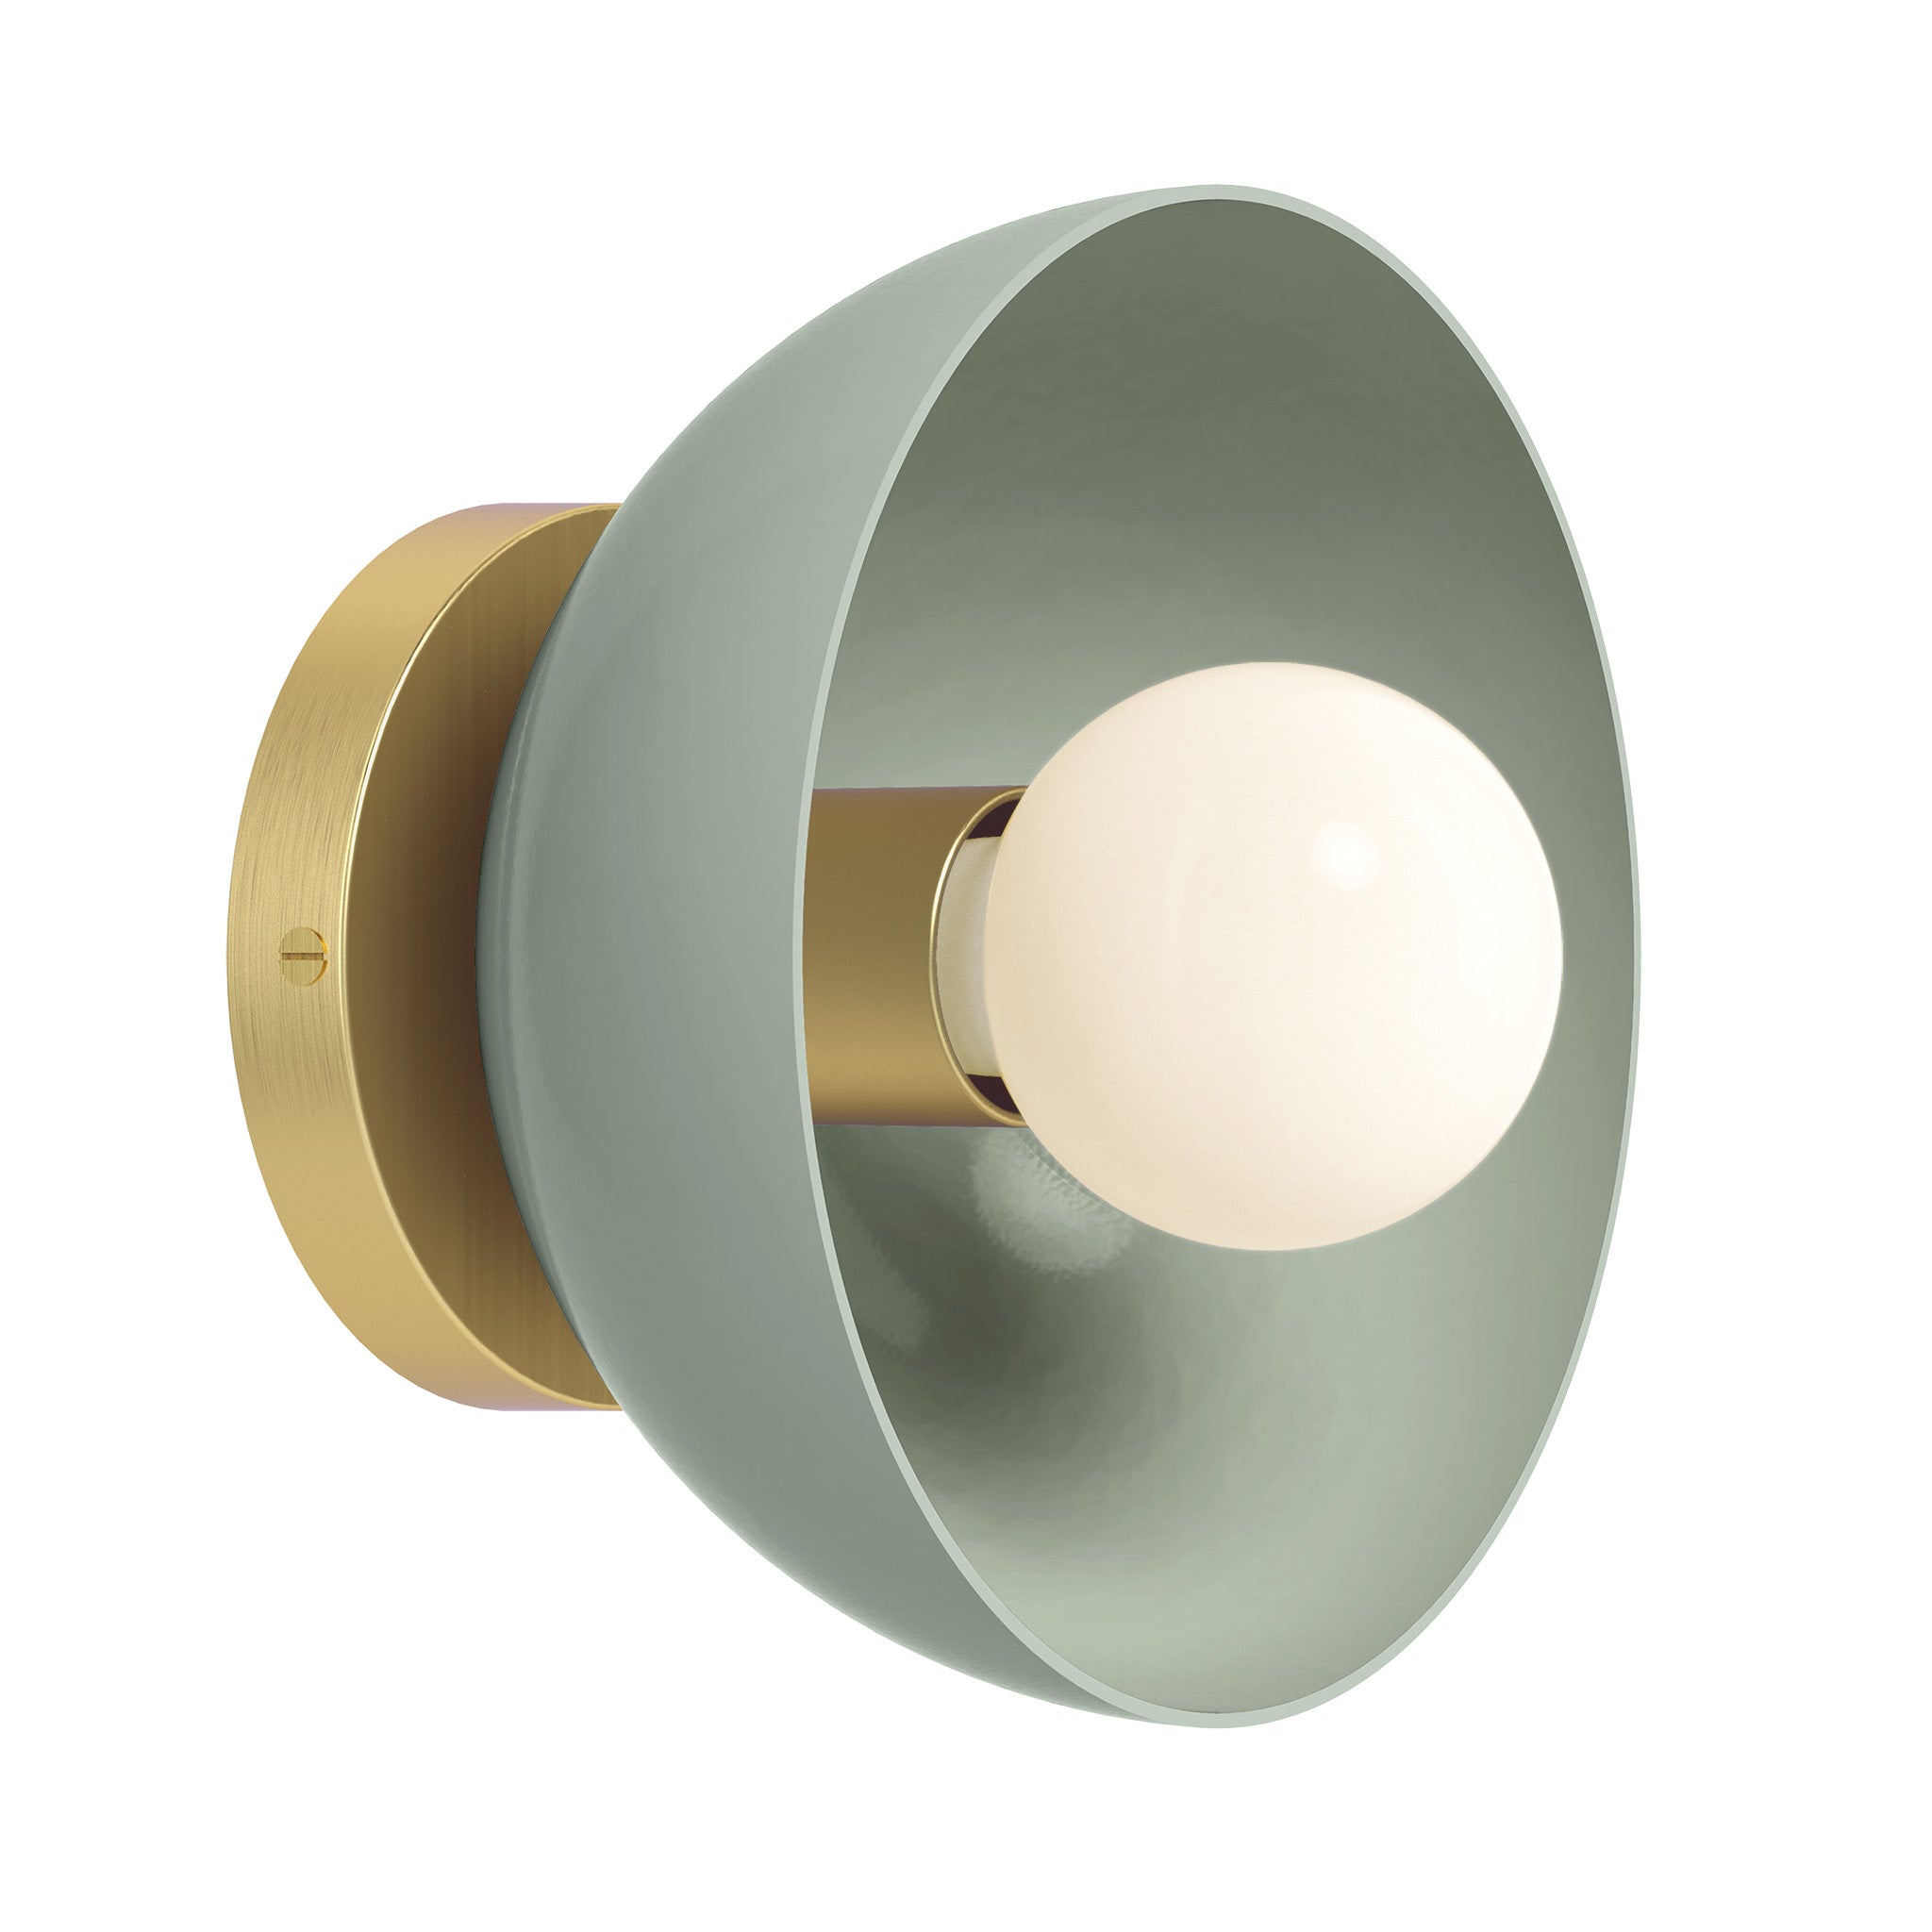 Brass and spa color hemi dome sconce 8" dutton brown lighting